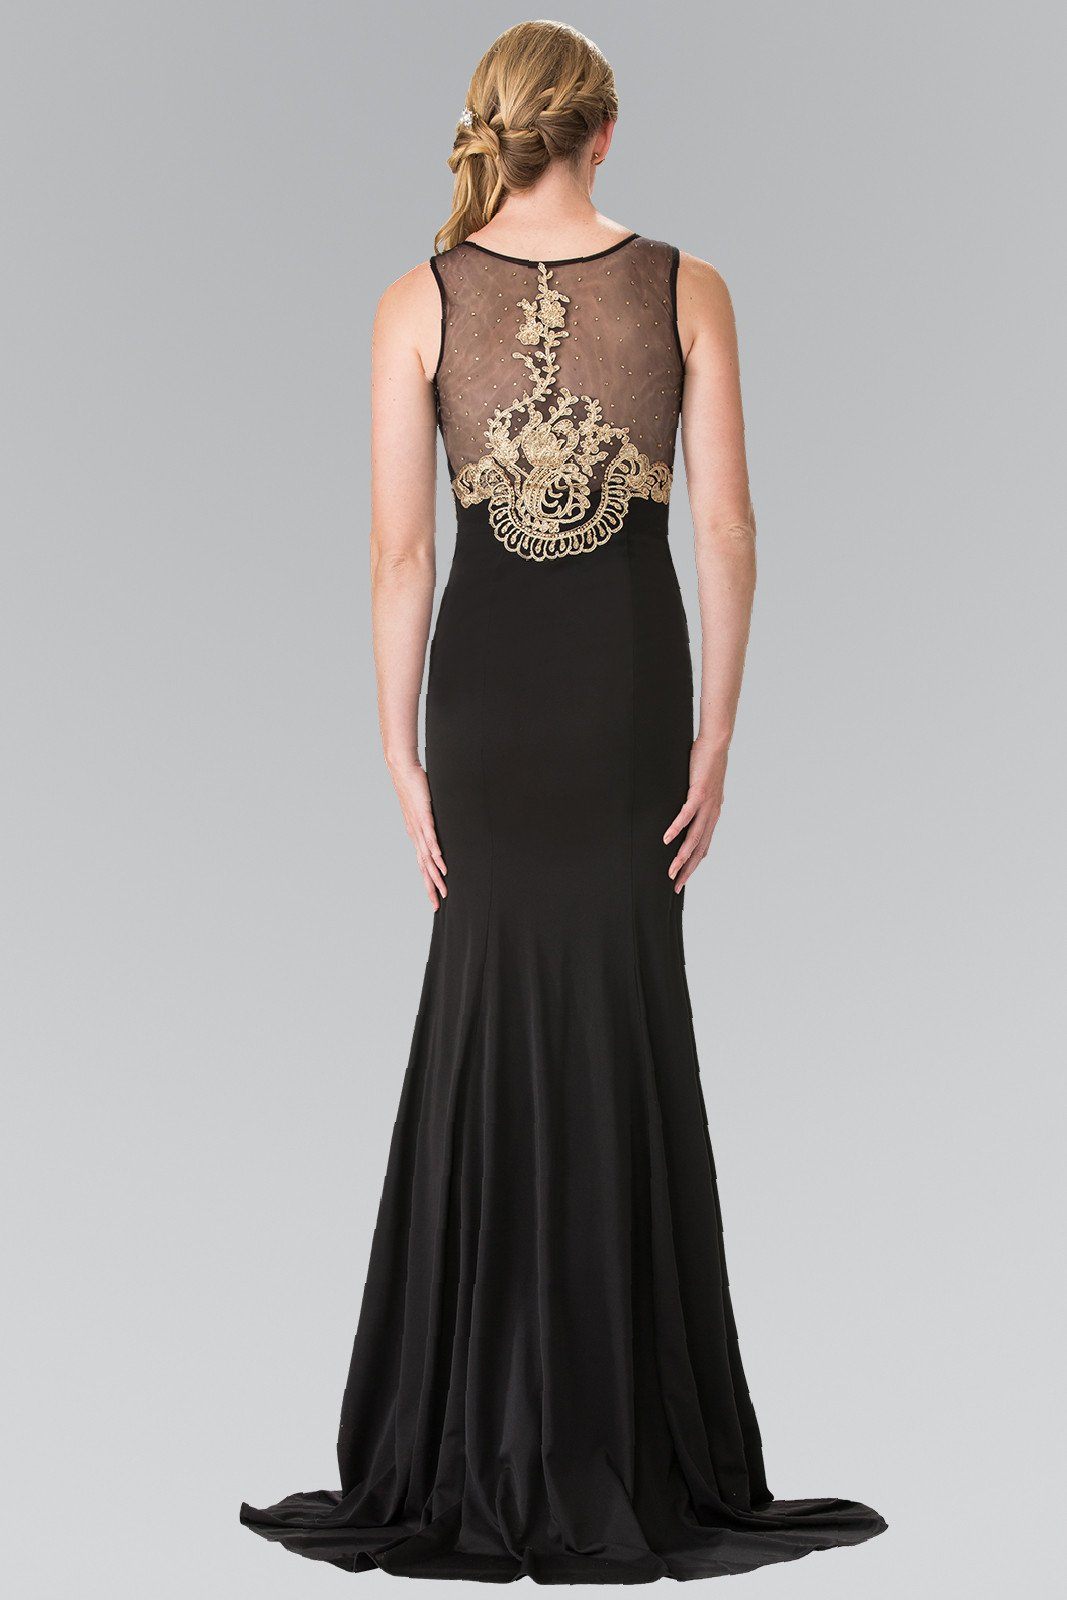 Long Lace Appliqued Dress with Sheer Bodice by Elizabeth K GL2230-Long Formal Dresses-ABC Fashion